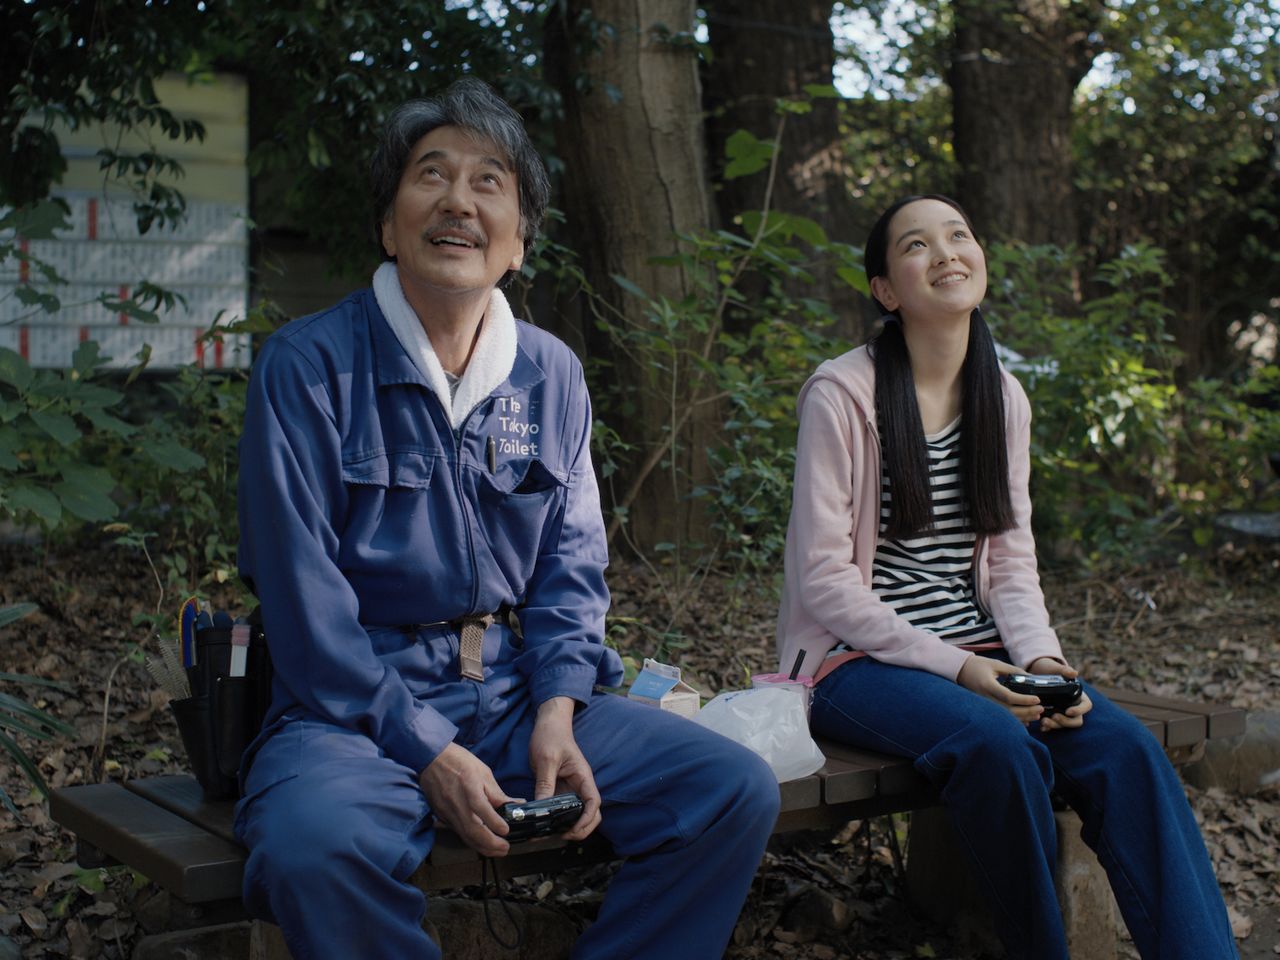 Yakusho (left) as Hirayama, a cleaner of public restrooms who has learned to appreciate life’s small joys. The movie used the same uniforms used by actual cleaning staff, which were created by Japanese designer Nigo specifically for the Tokyo Toilet Project. (© 2023 Master Mind Ltd.)